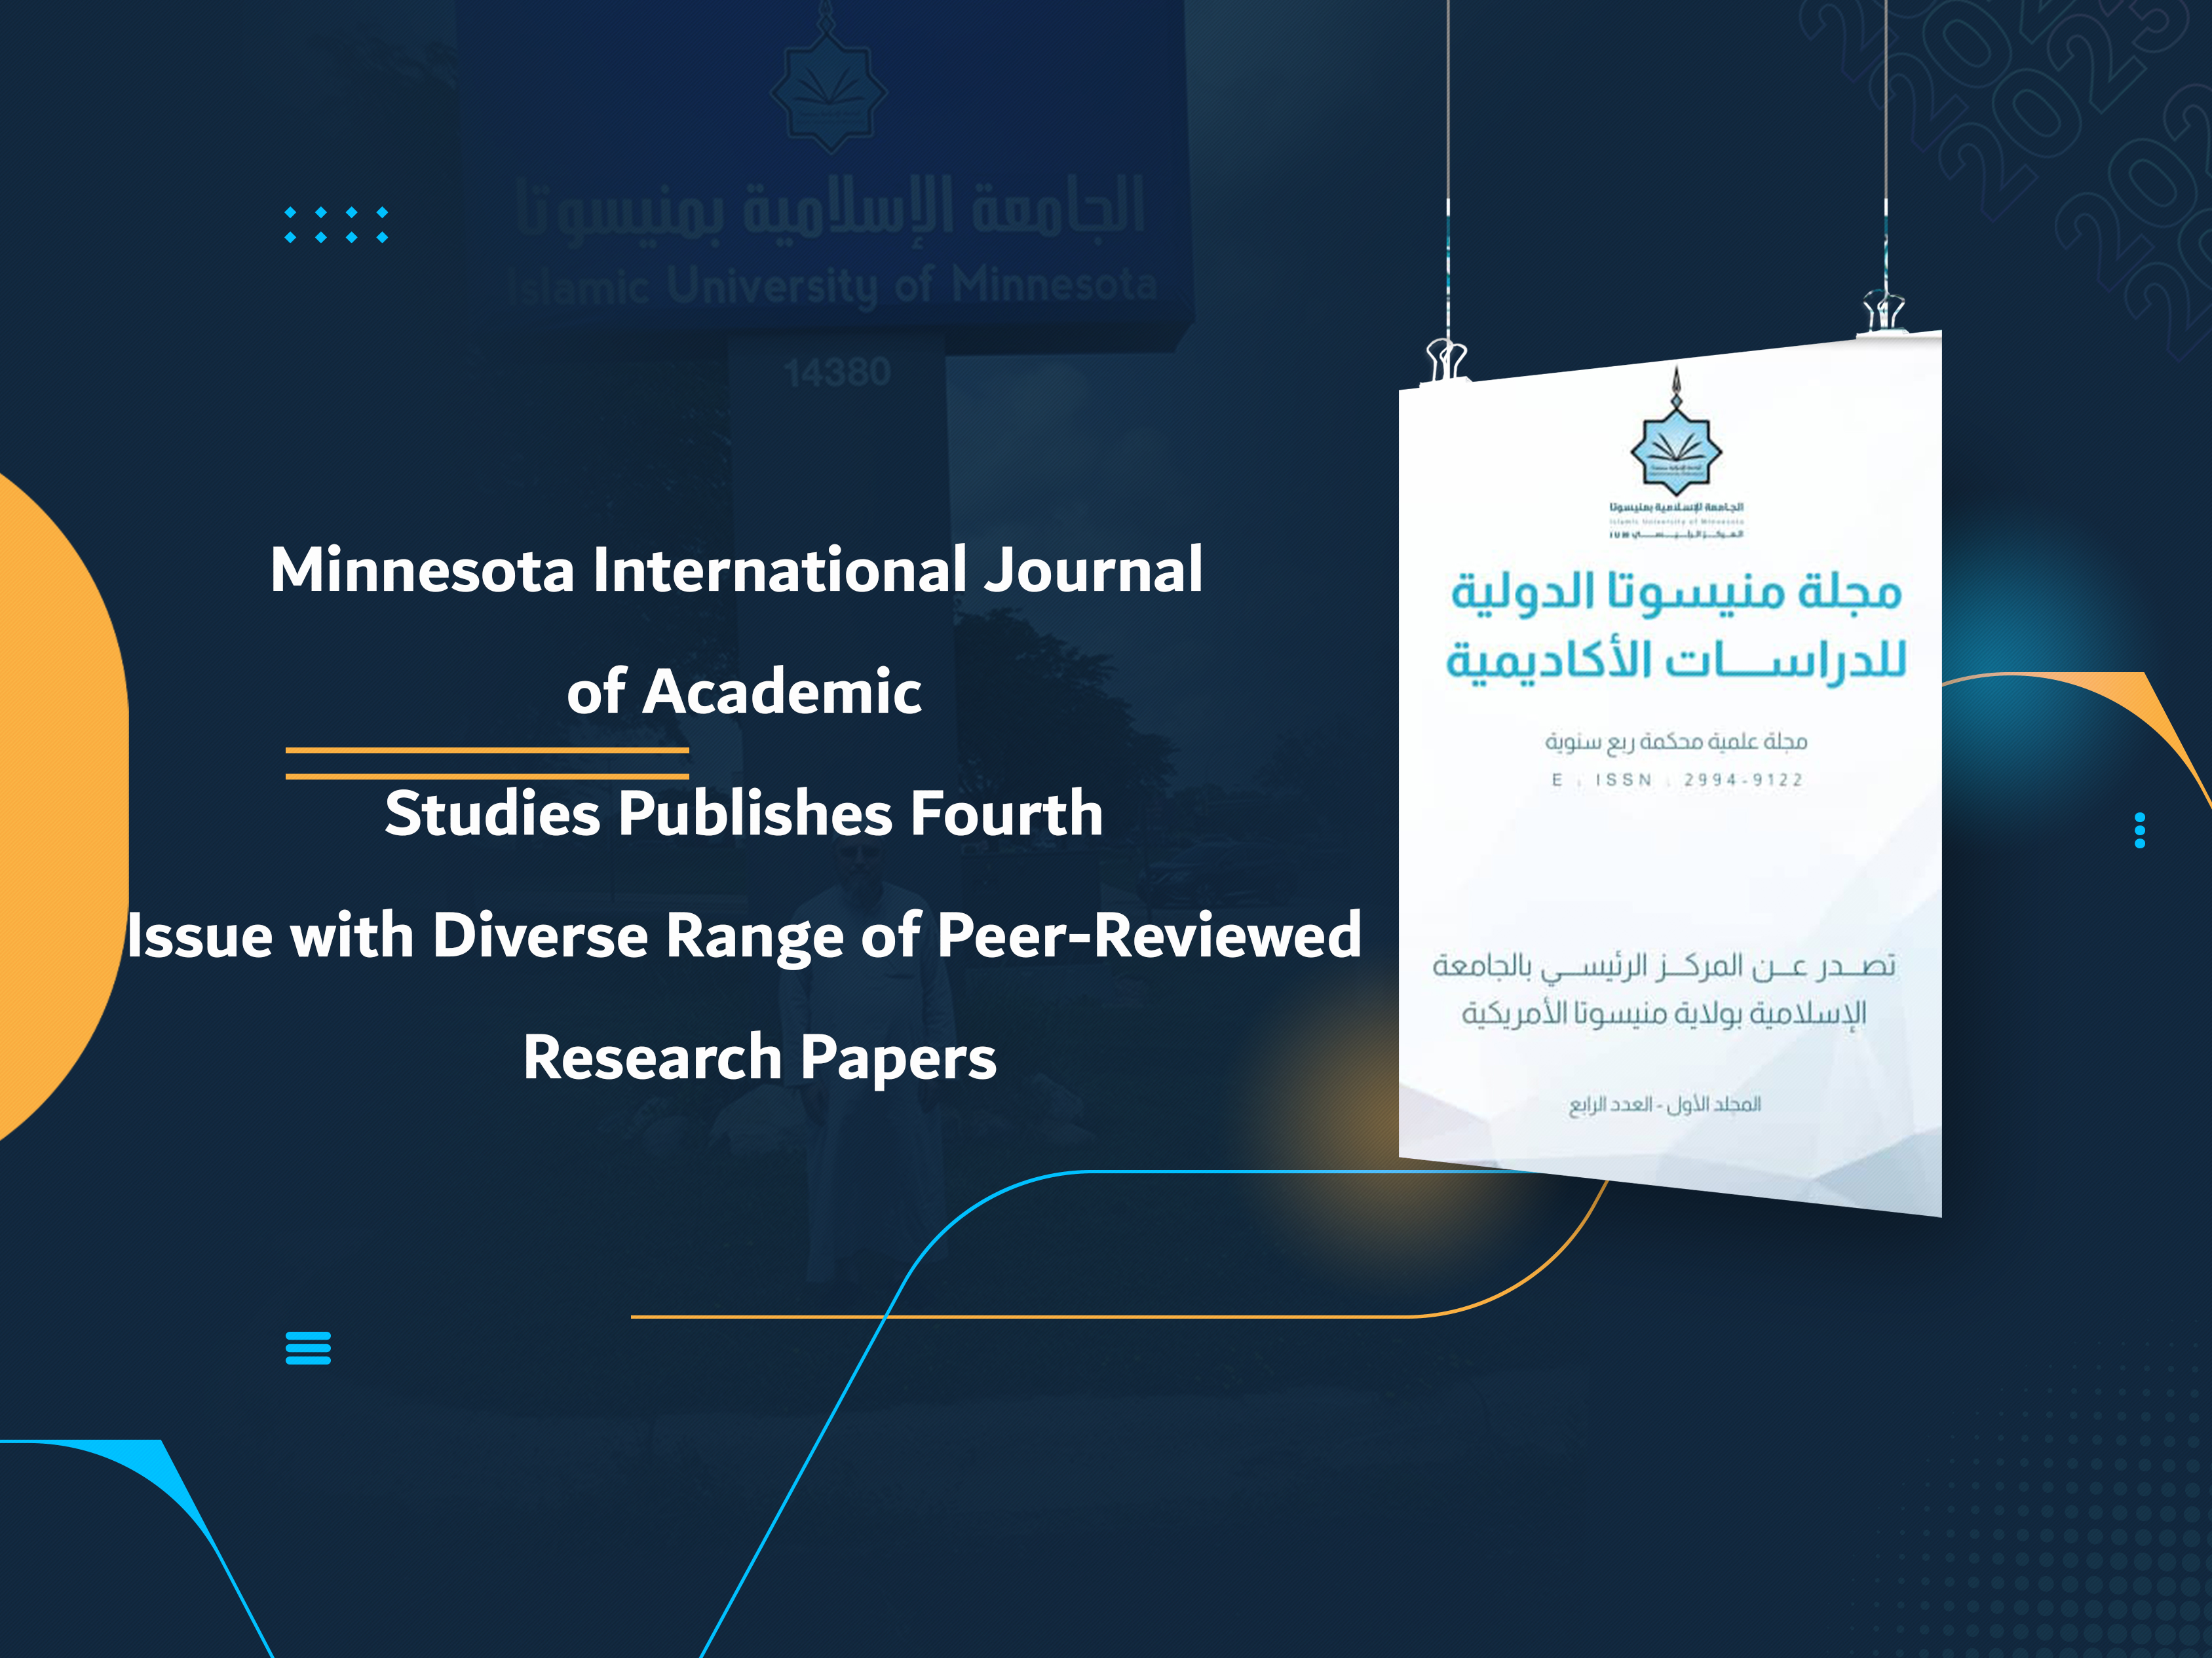 Minnesota International Journal of Academic Studies Publishes Fourth Issue with Diverse Range of Peer-Reviewed Research Papers